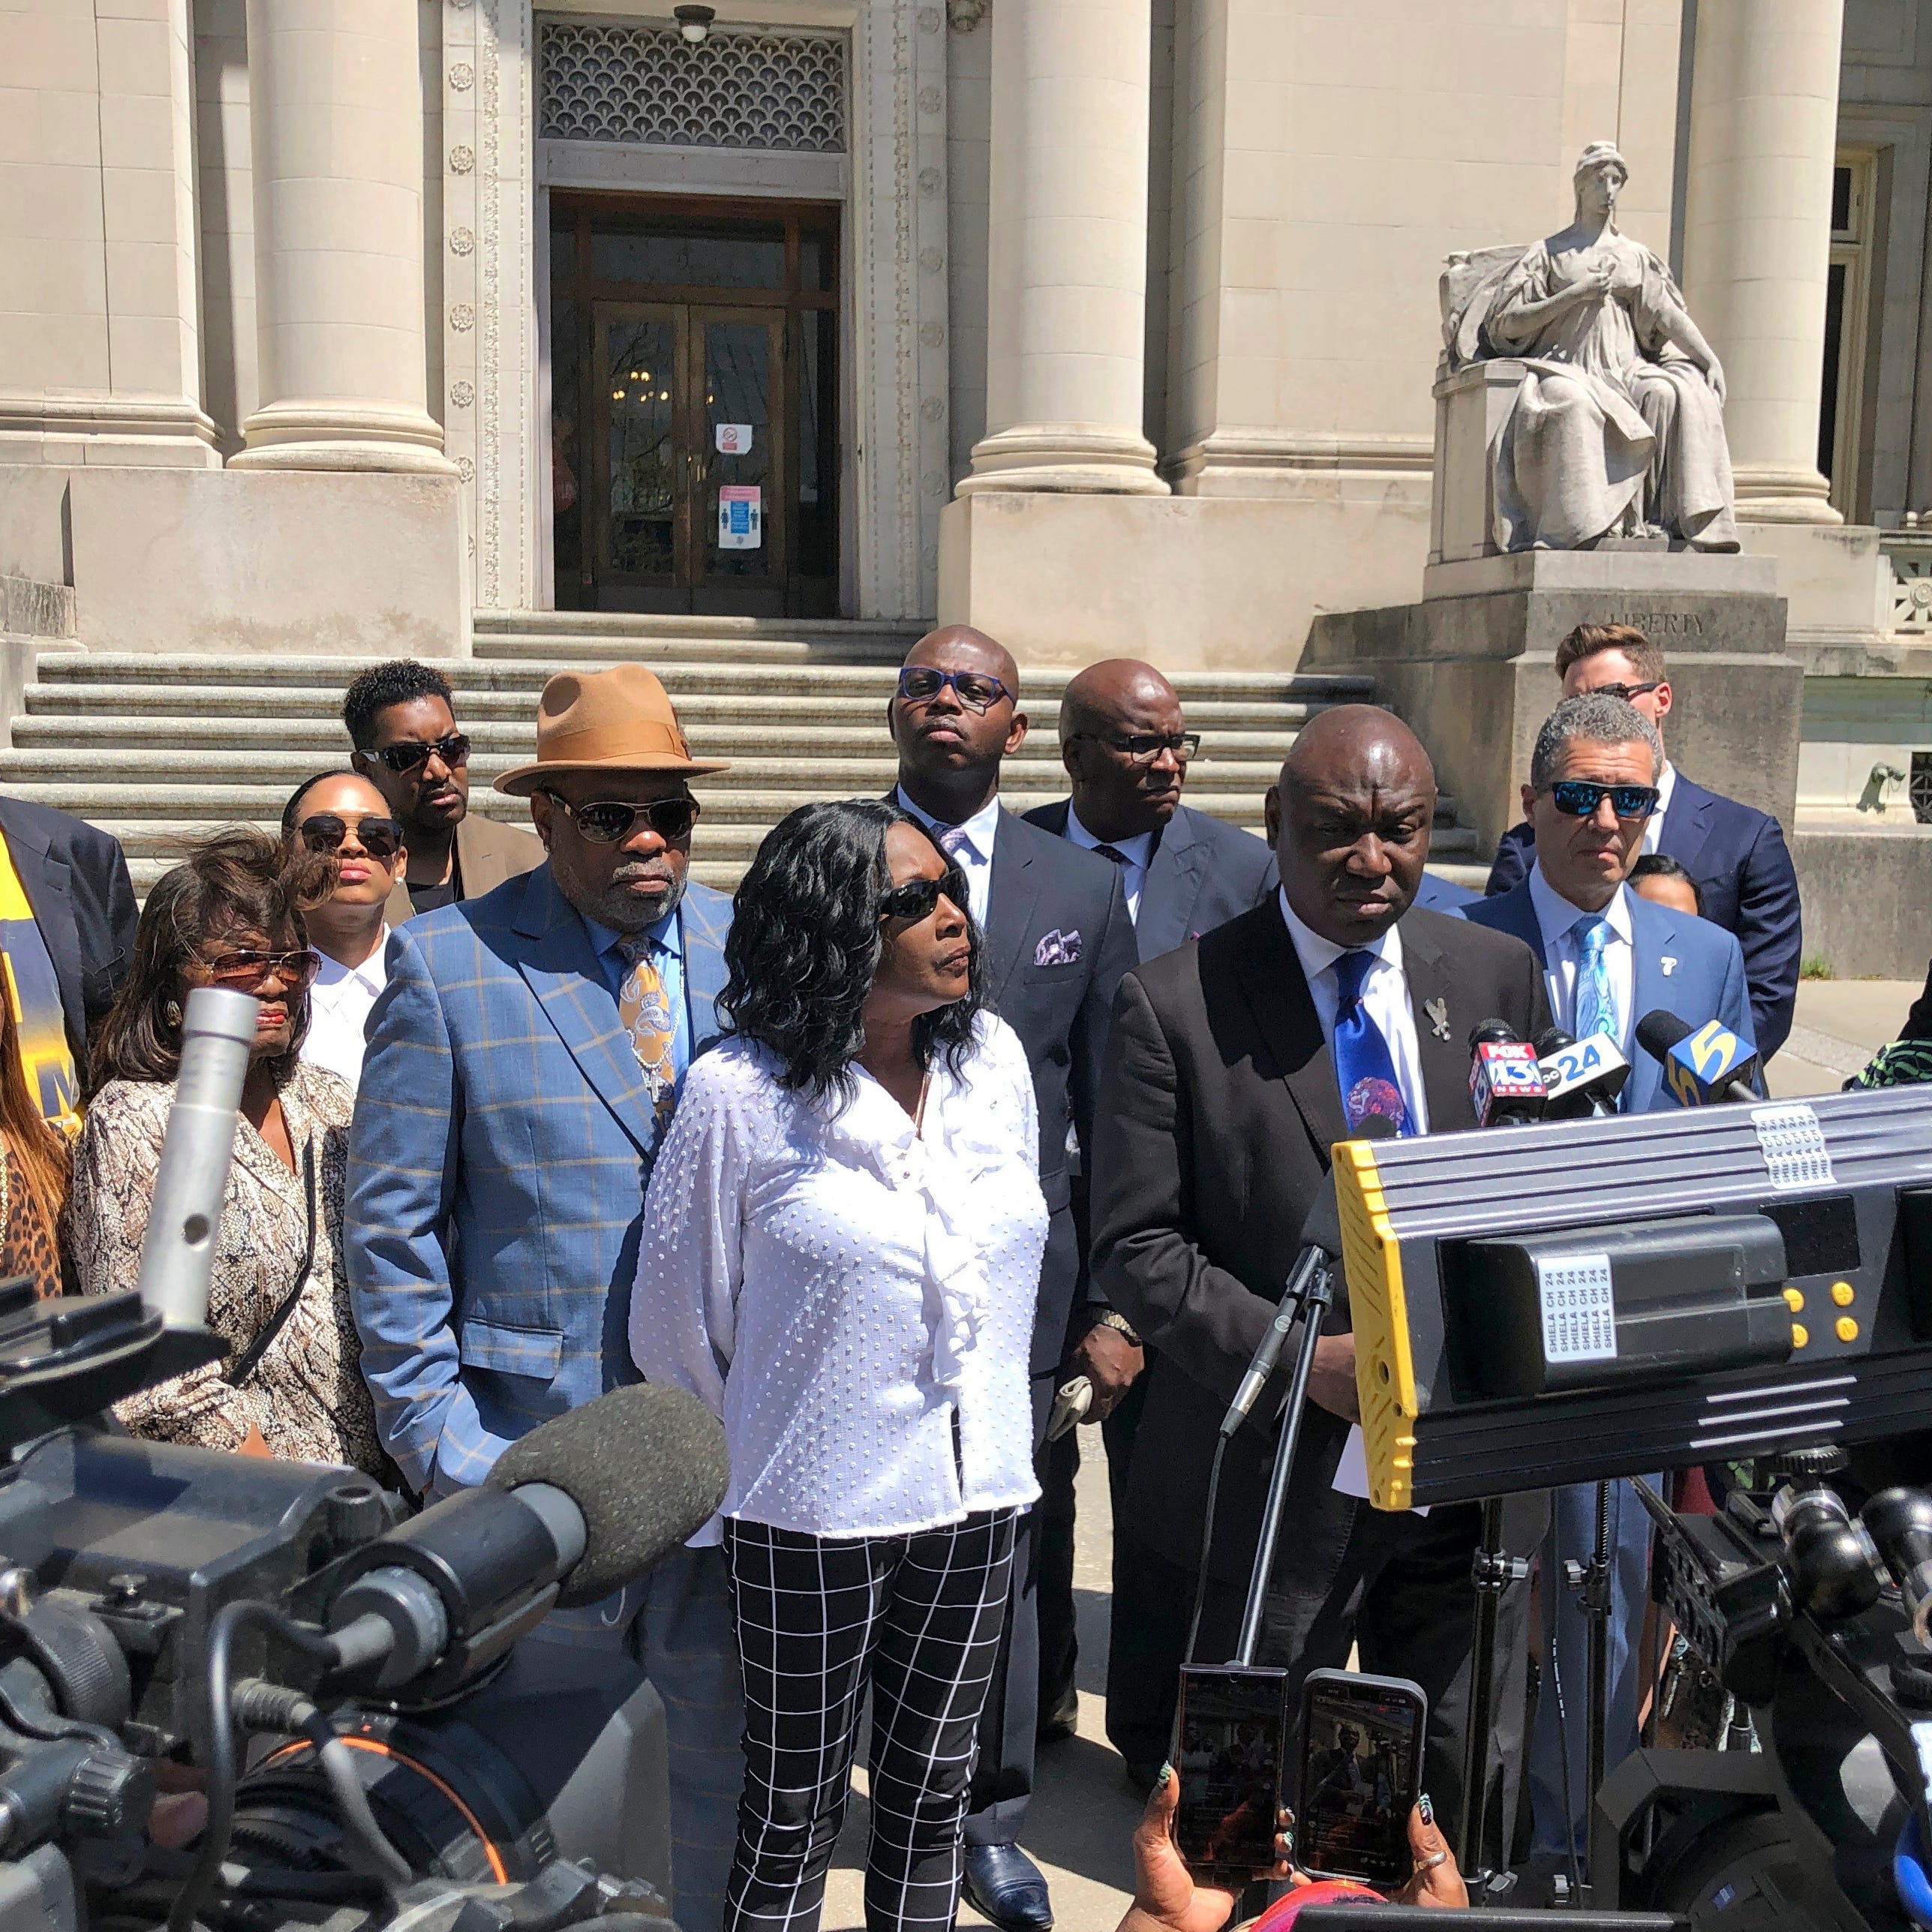 Attorney Ben Crump, and relatives for Tyre Nichols, discuss a lawsuit filed against the city of Memphis and police officers, Wednesday April 19, 2023 in Memphis, Tenn.